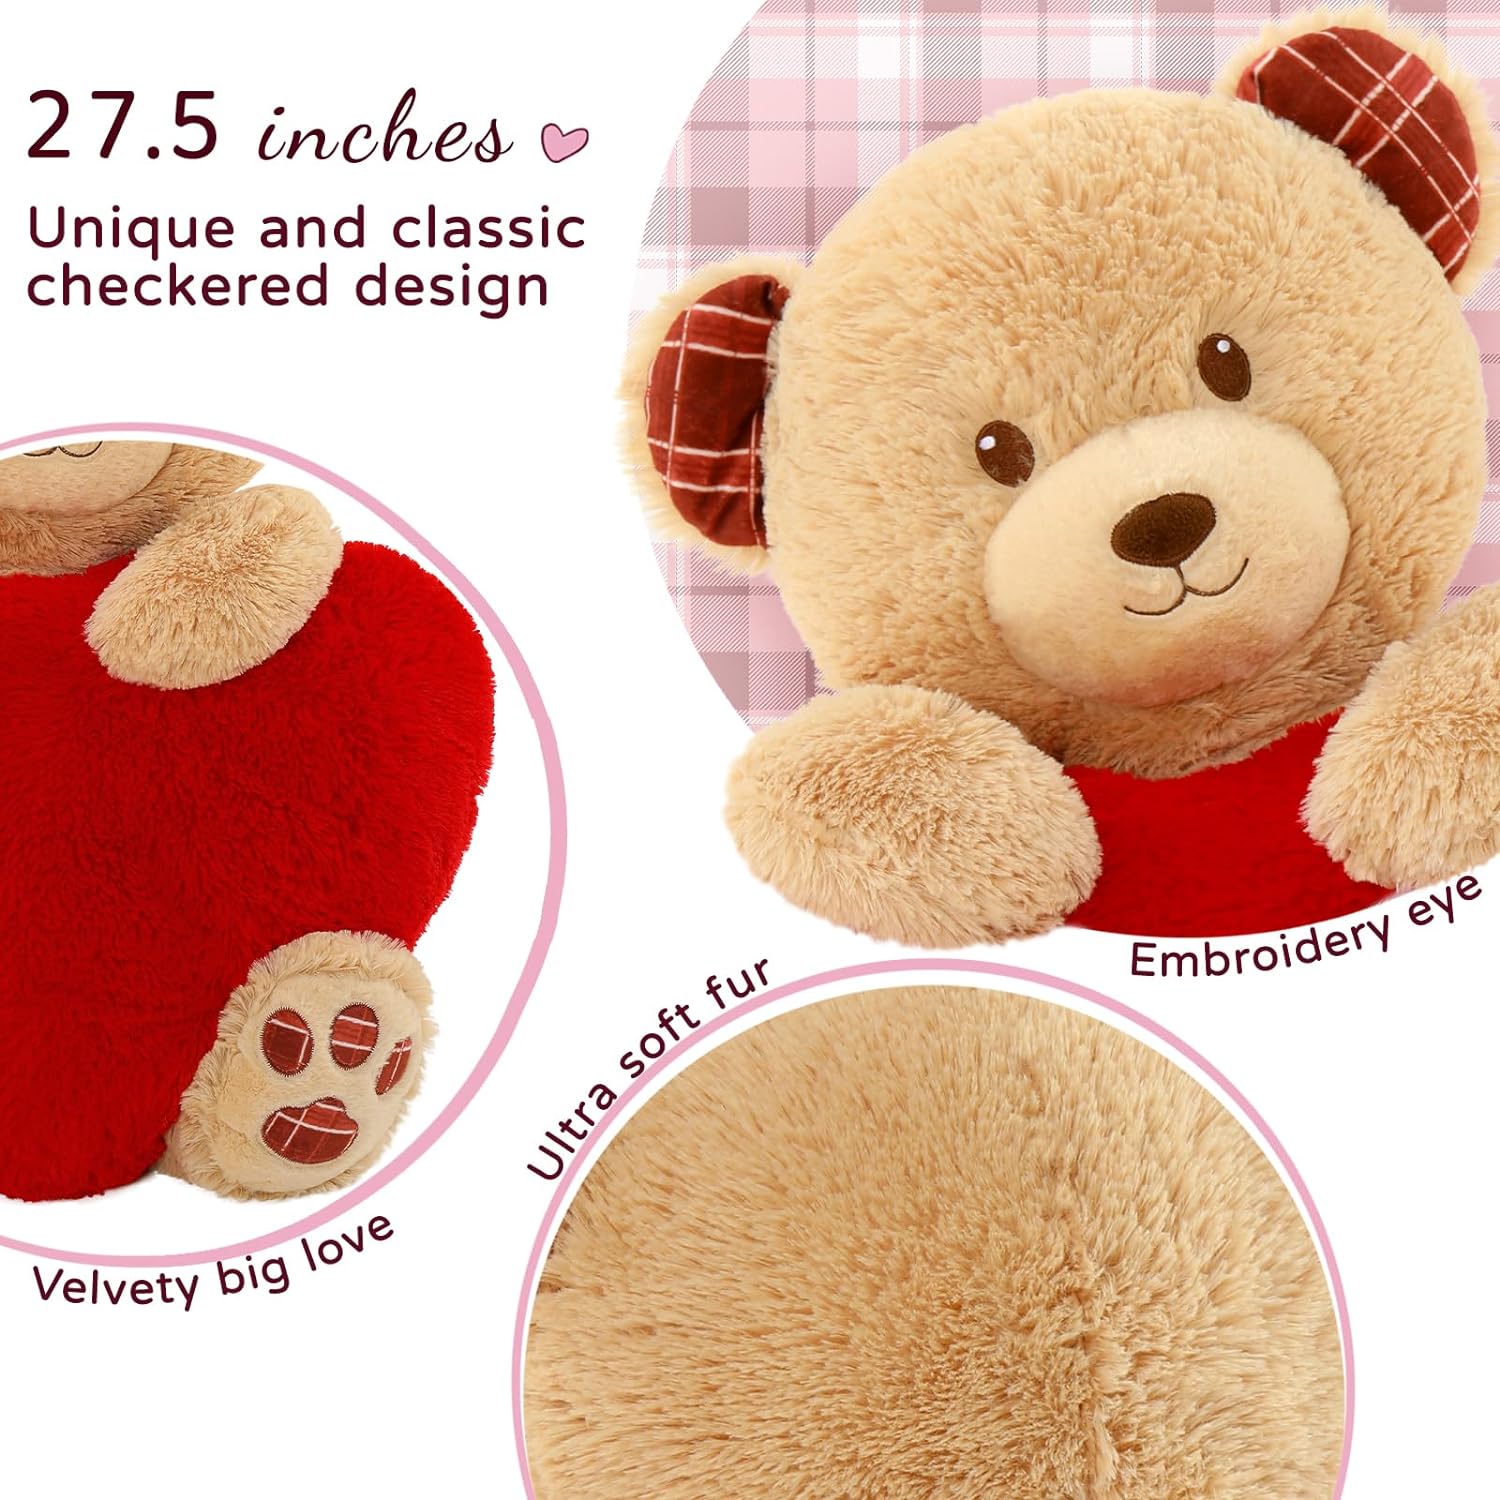 Valentine's Day Teddy Bear Plush Toy, Brown, 28 inches